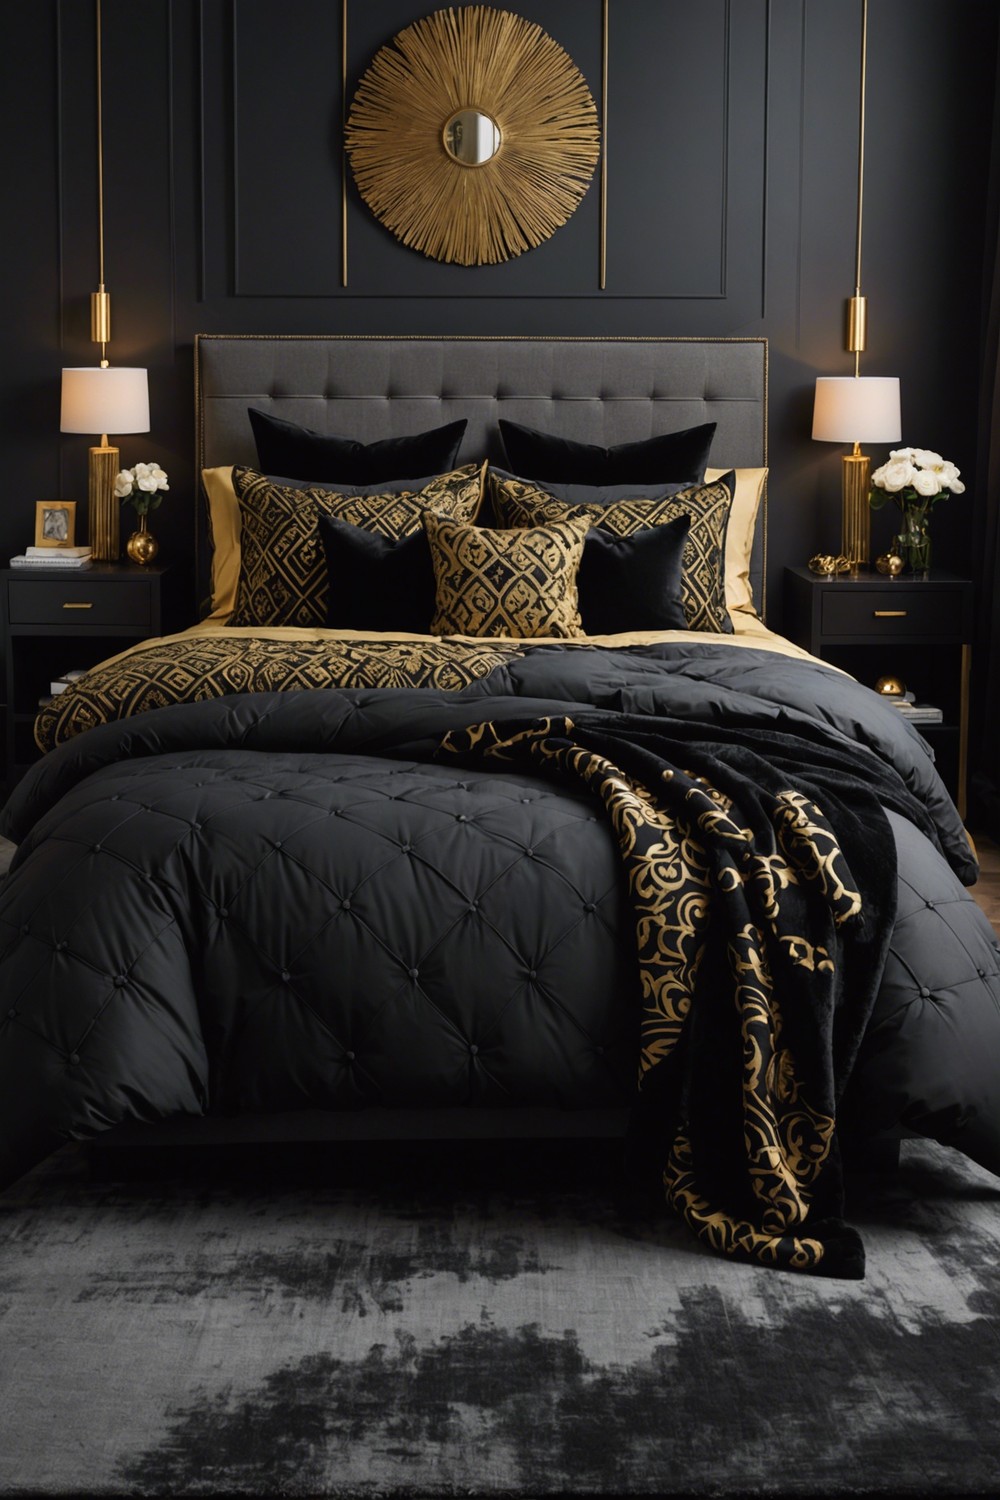 Black and Gold Patterned Throw Pillows